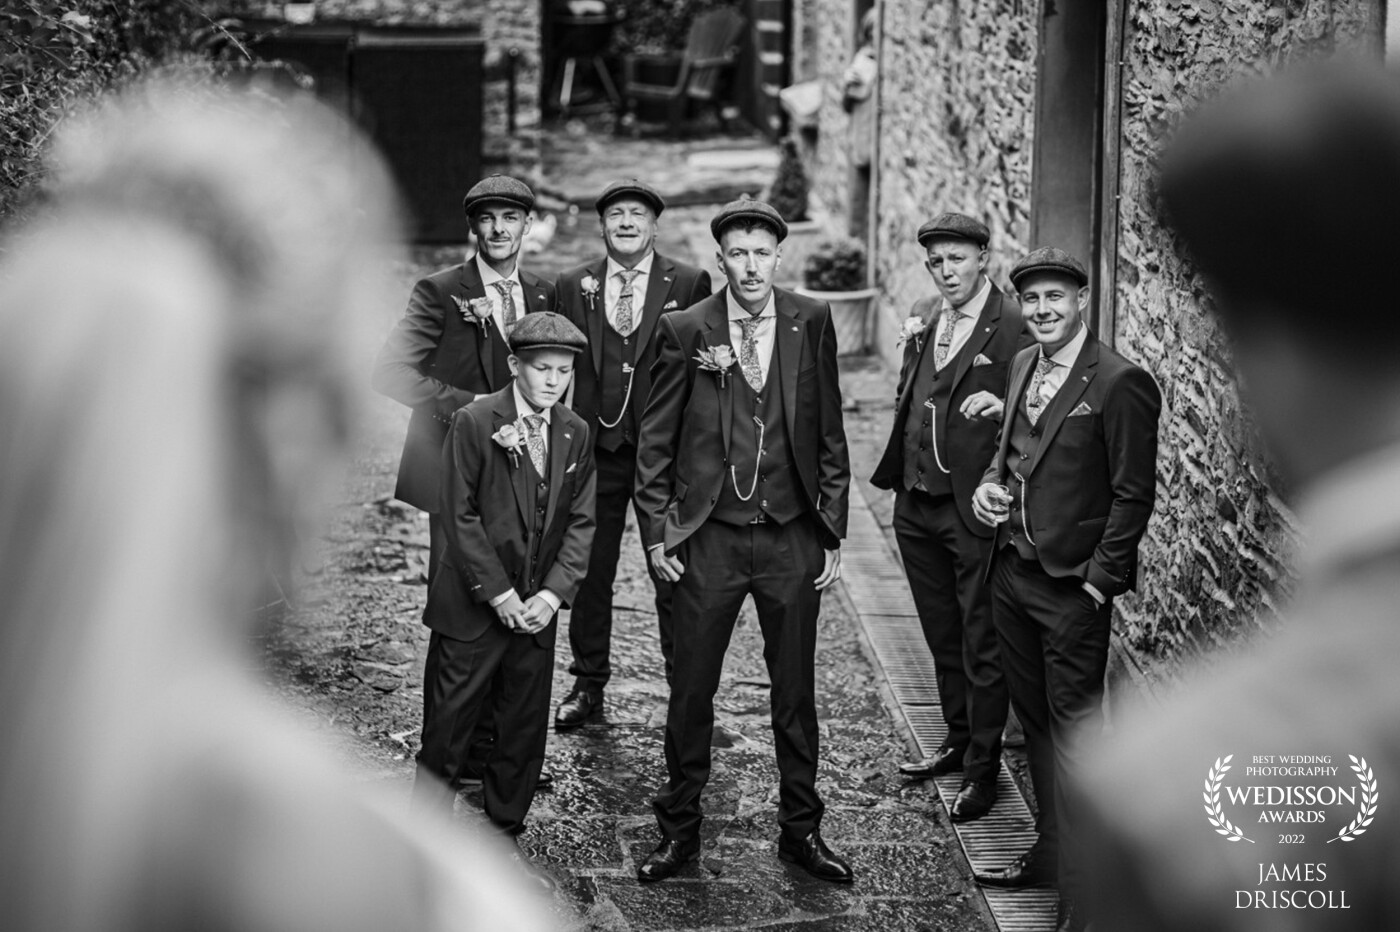 Peaky Blinder wedding. Bride and Groom went all out to dress up the entire Bridal party like the famous tv series Peaky Blinders. <br />
This image is shooting between the bride and groom down towards the Groomsmen.